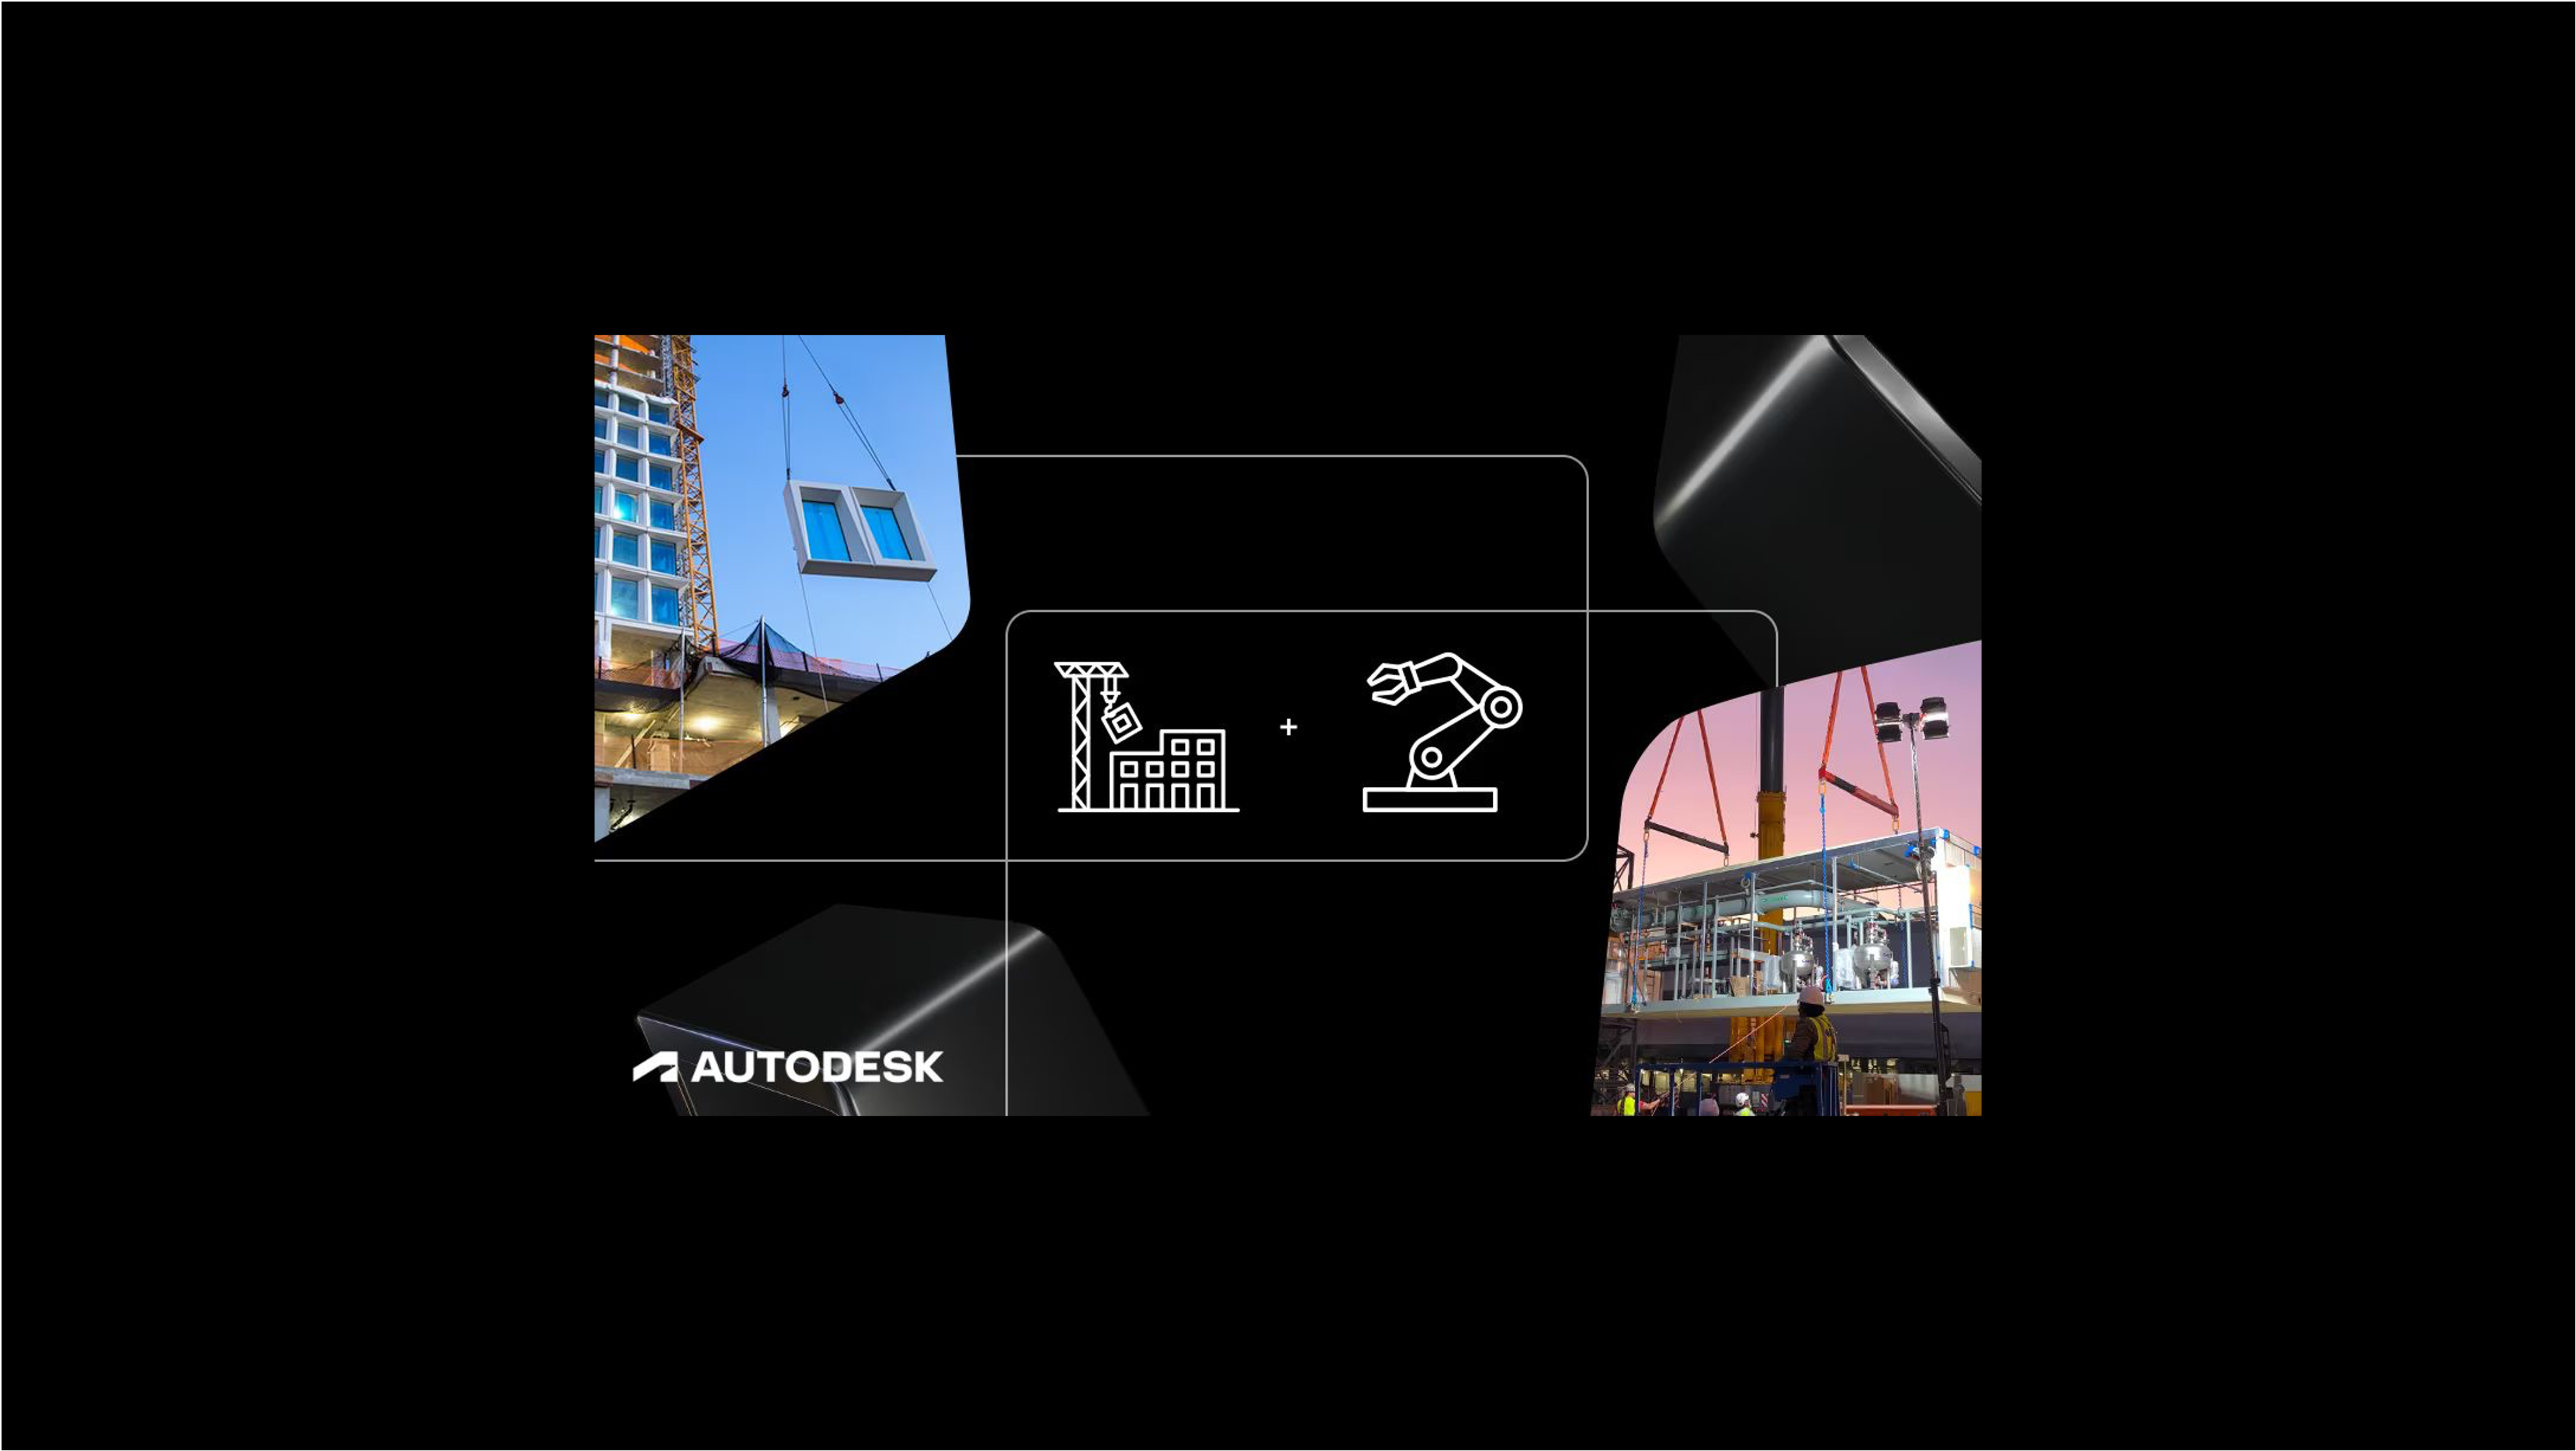 Autodesk-backed Transcend Brings AI to Infrastructure Design